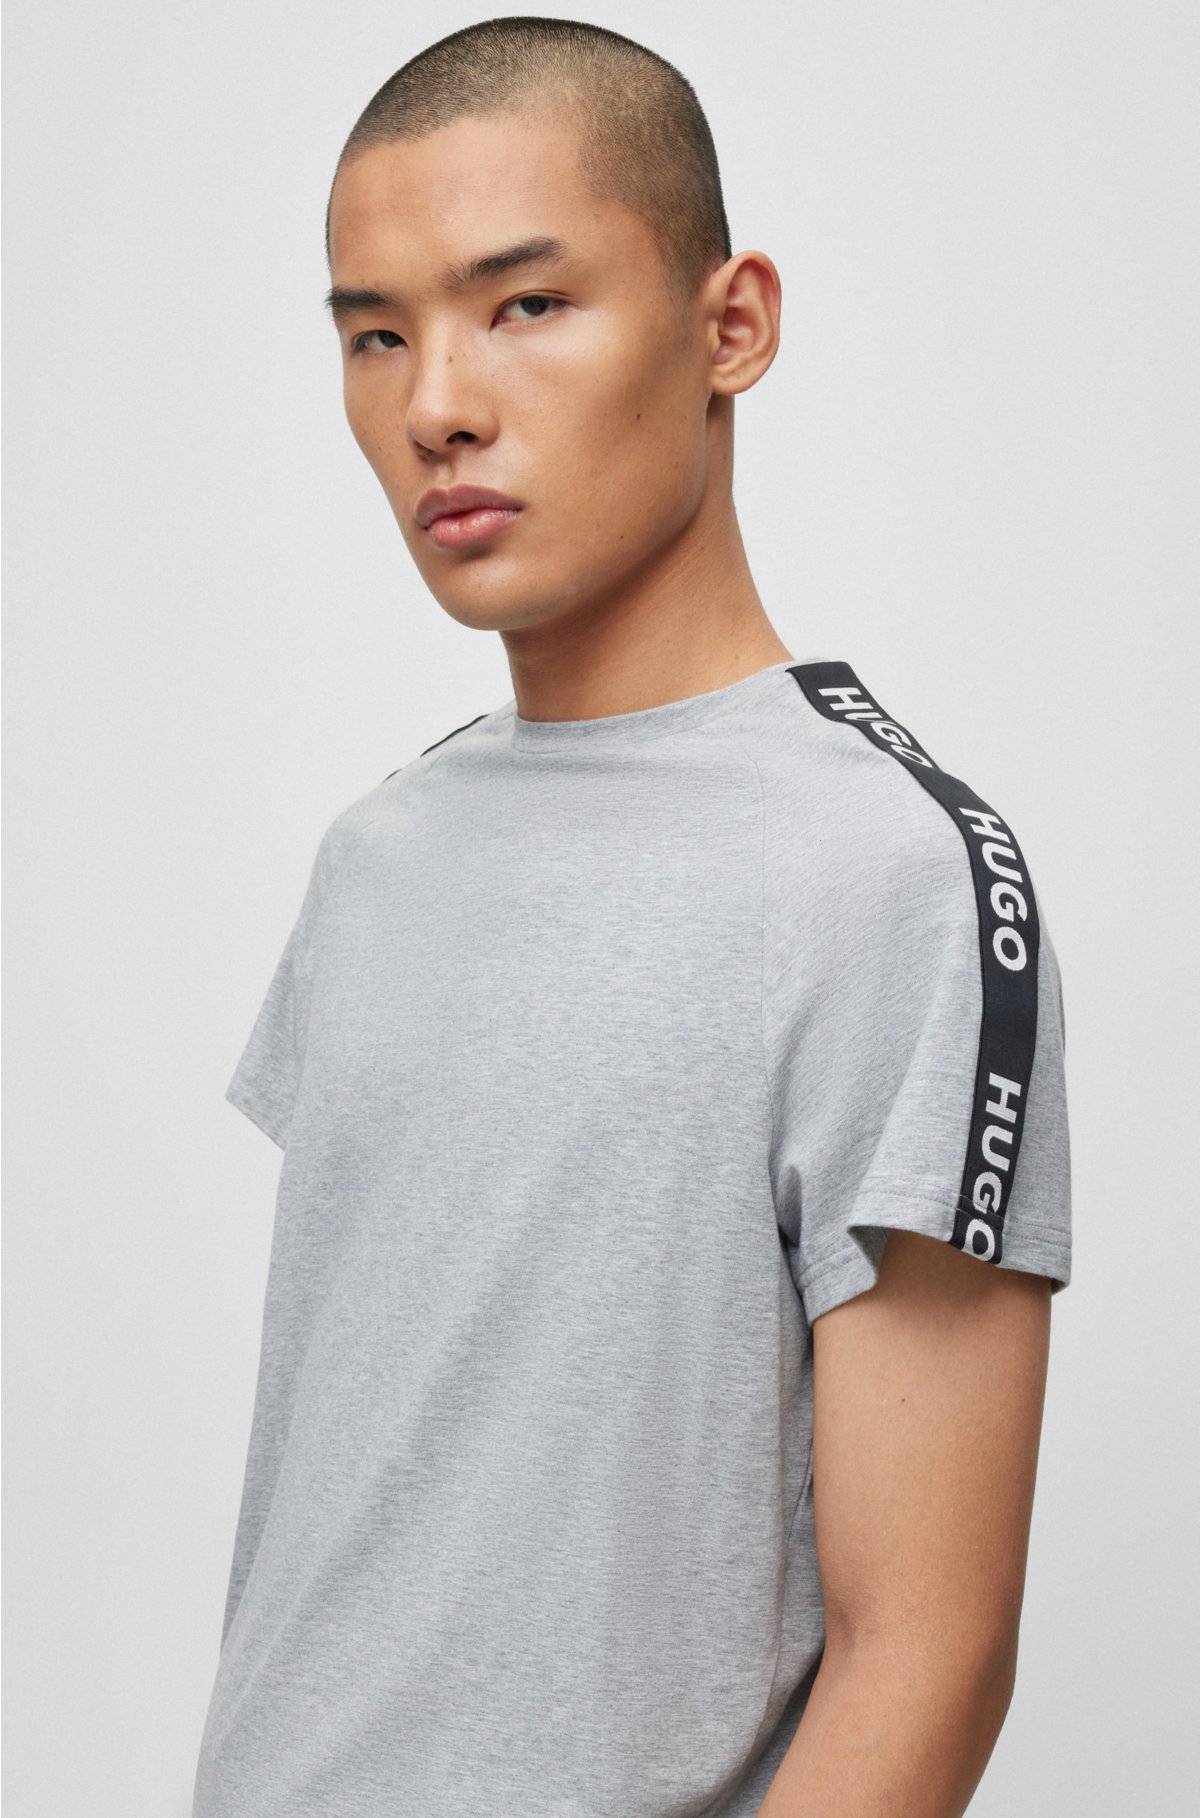 cotton - HUGO tape T-shirt in Relaxed-fit logo stretch with